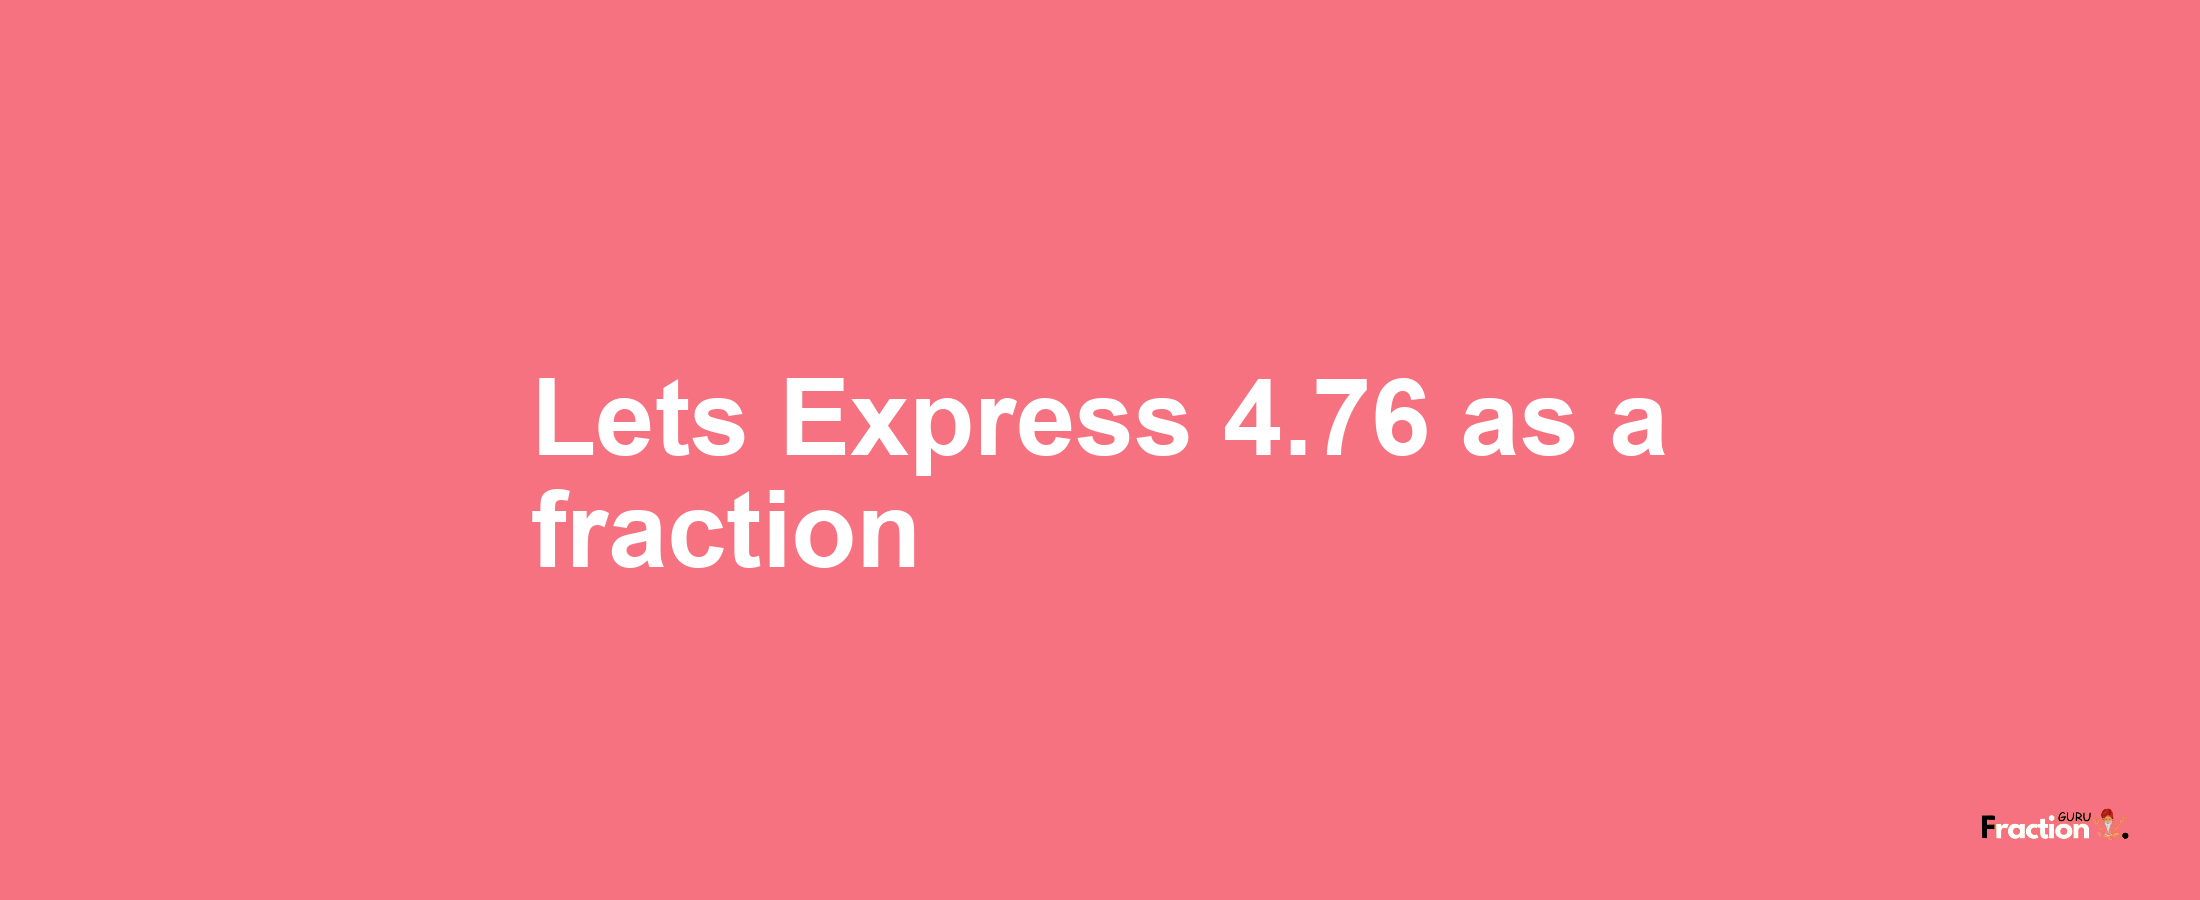 Lets Express 4.76 as afraction